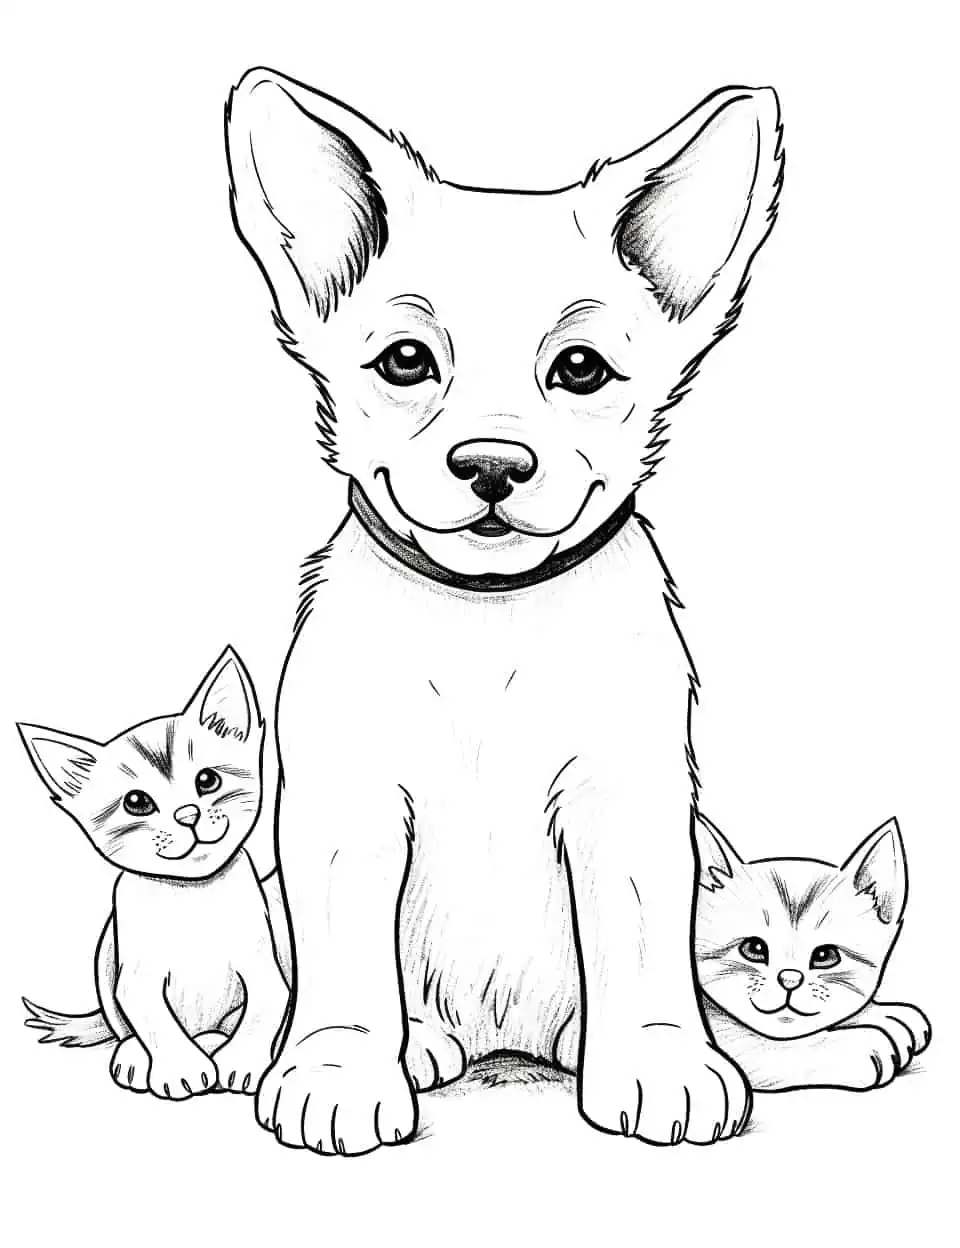 German Shepherd and Kittens Coloring Page - A gentle German Shepherd playing with kittens, showing their protective nature.